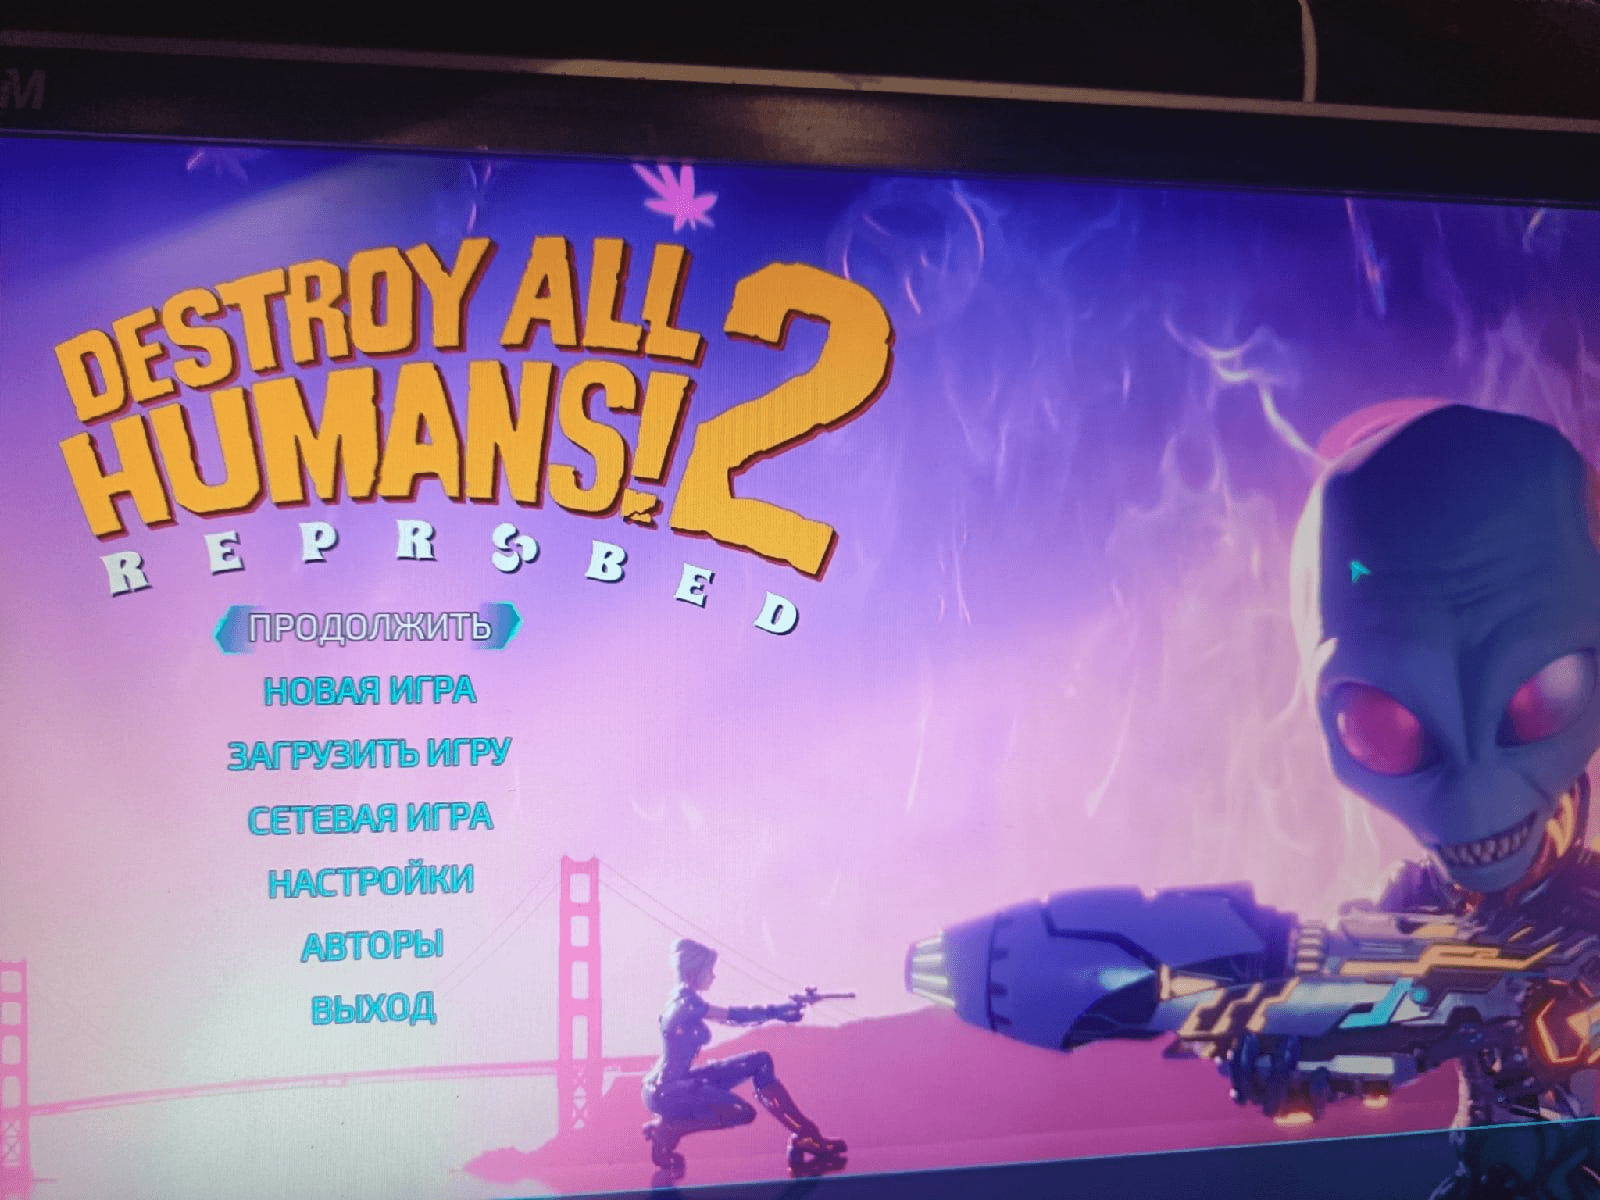 Destroy all humans reprobed. Destroy all Humans 2 reprobed Natalya. Destroy all Humans Remake. Destroy all Humans 2 2006.